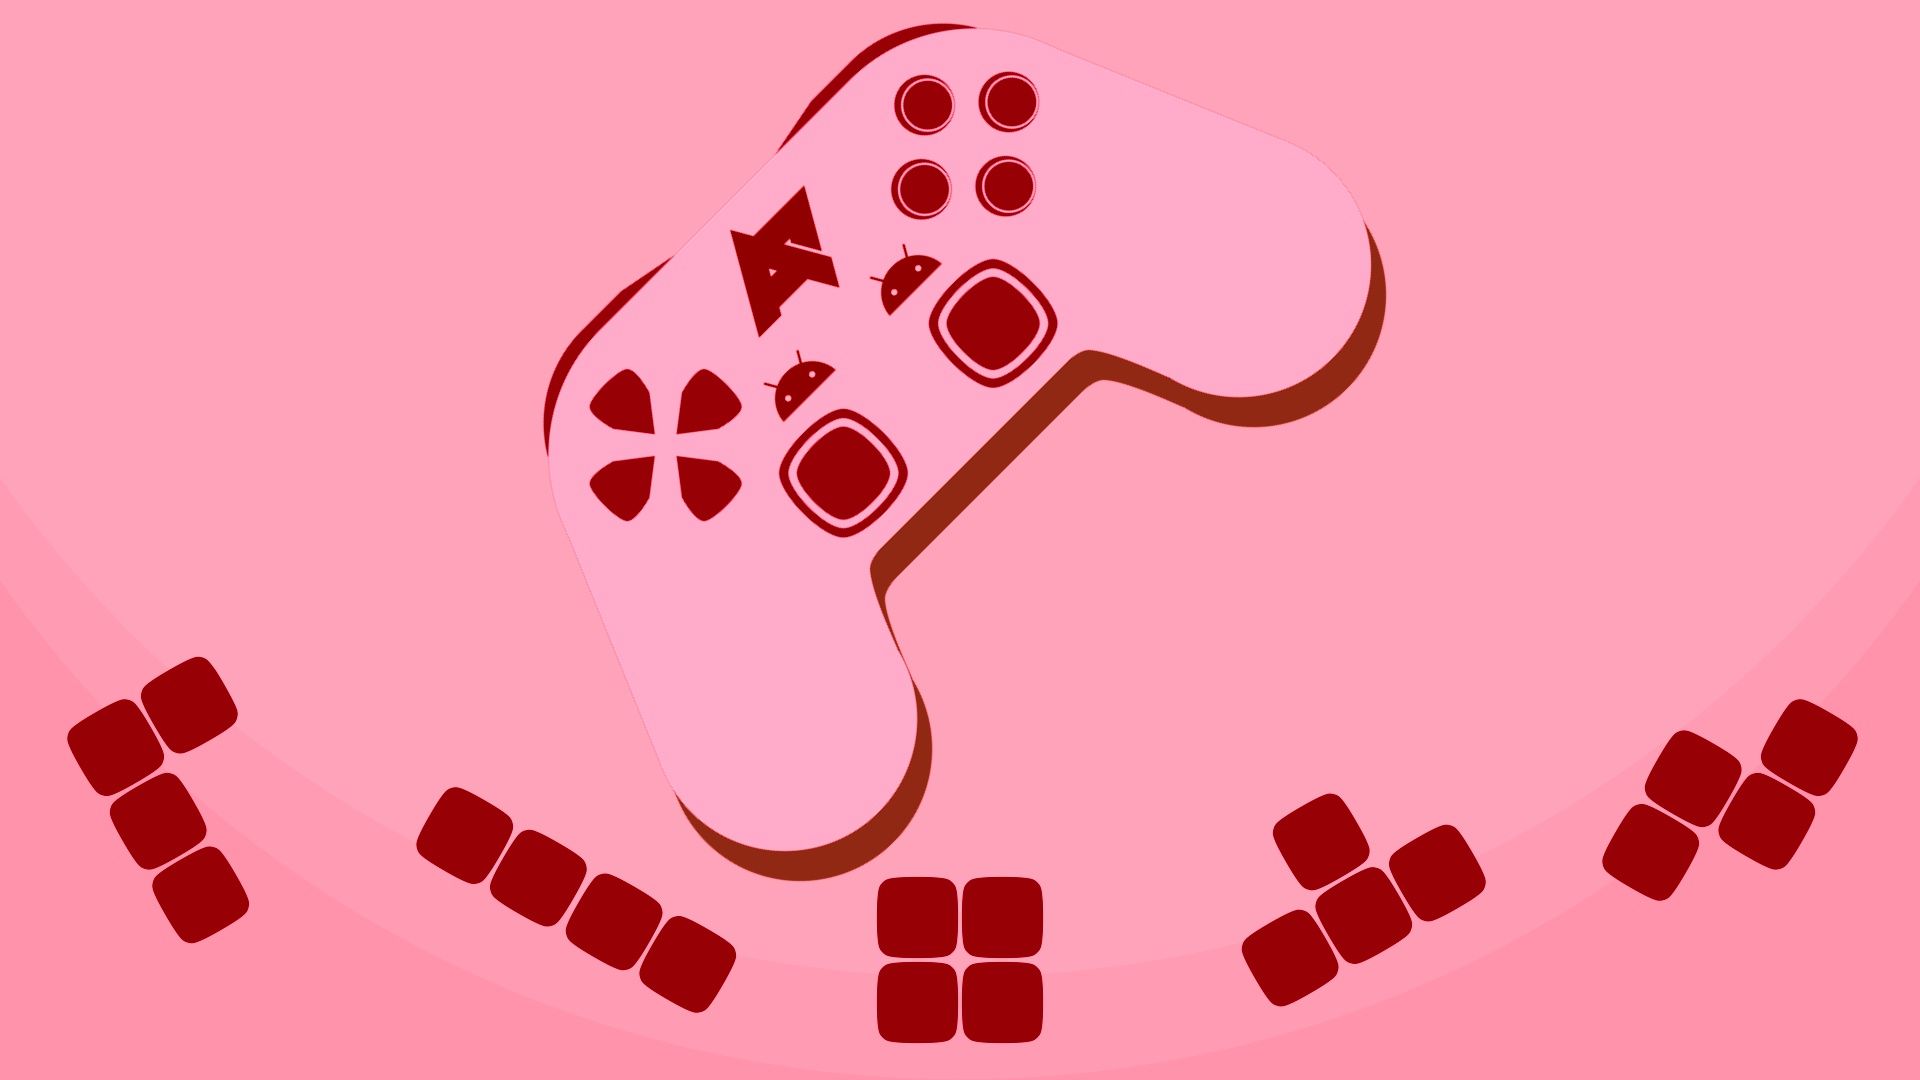 An AP-branded gaming console against a pink background with red tiles